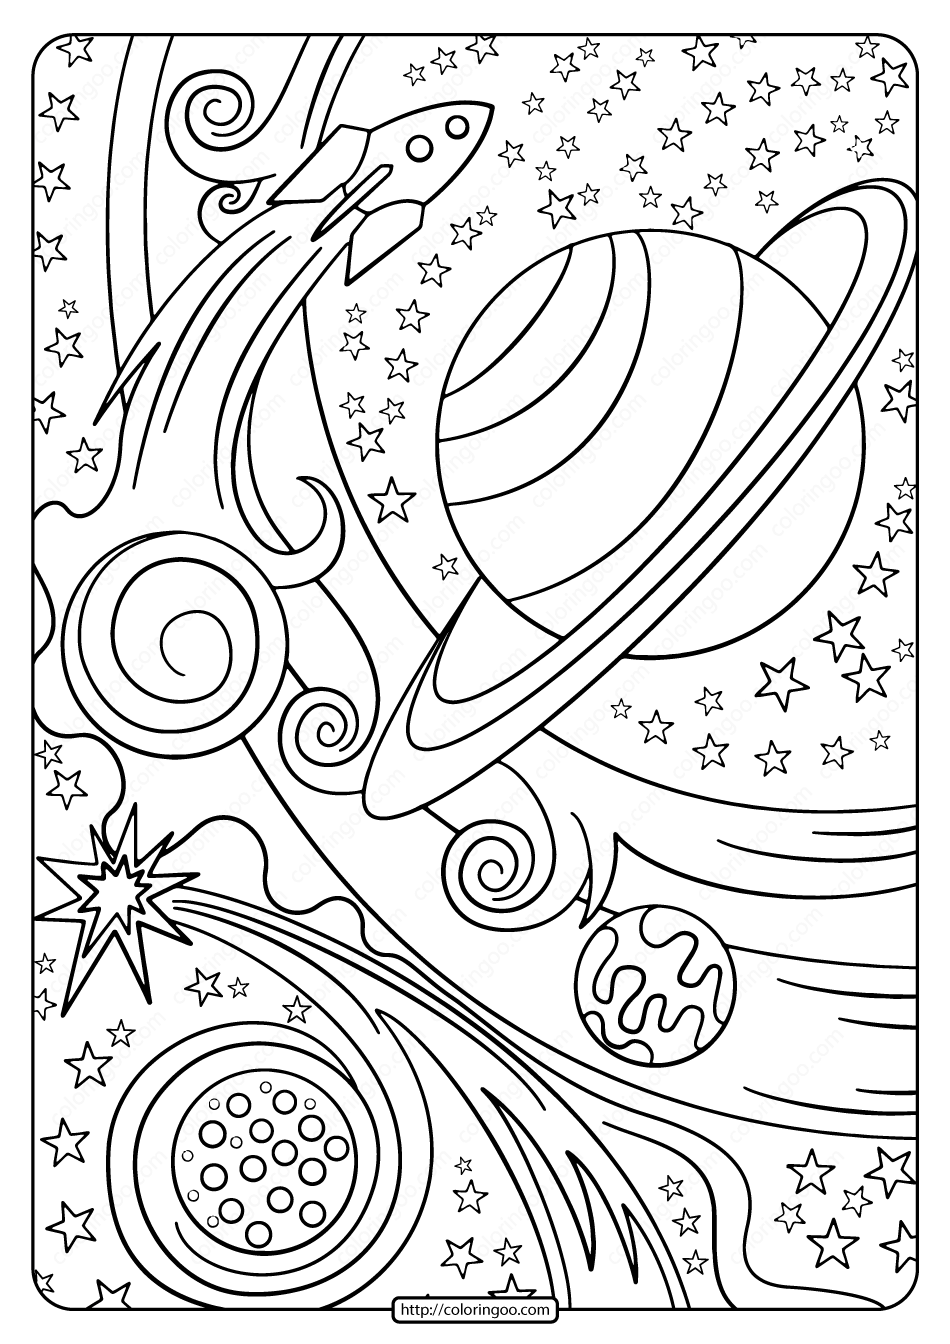 Free Printable Rocket and Planets Pdf Coloring Page